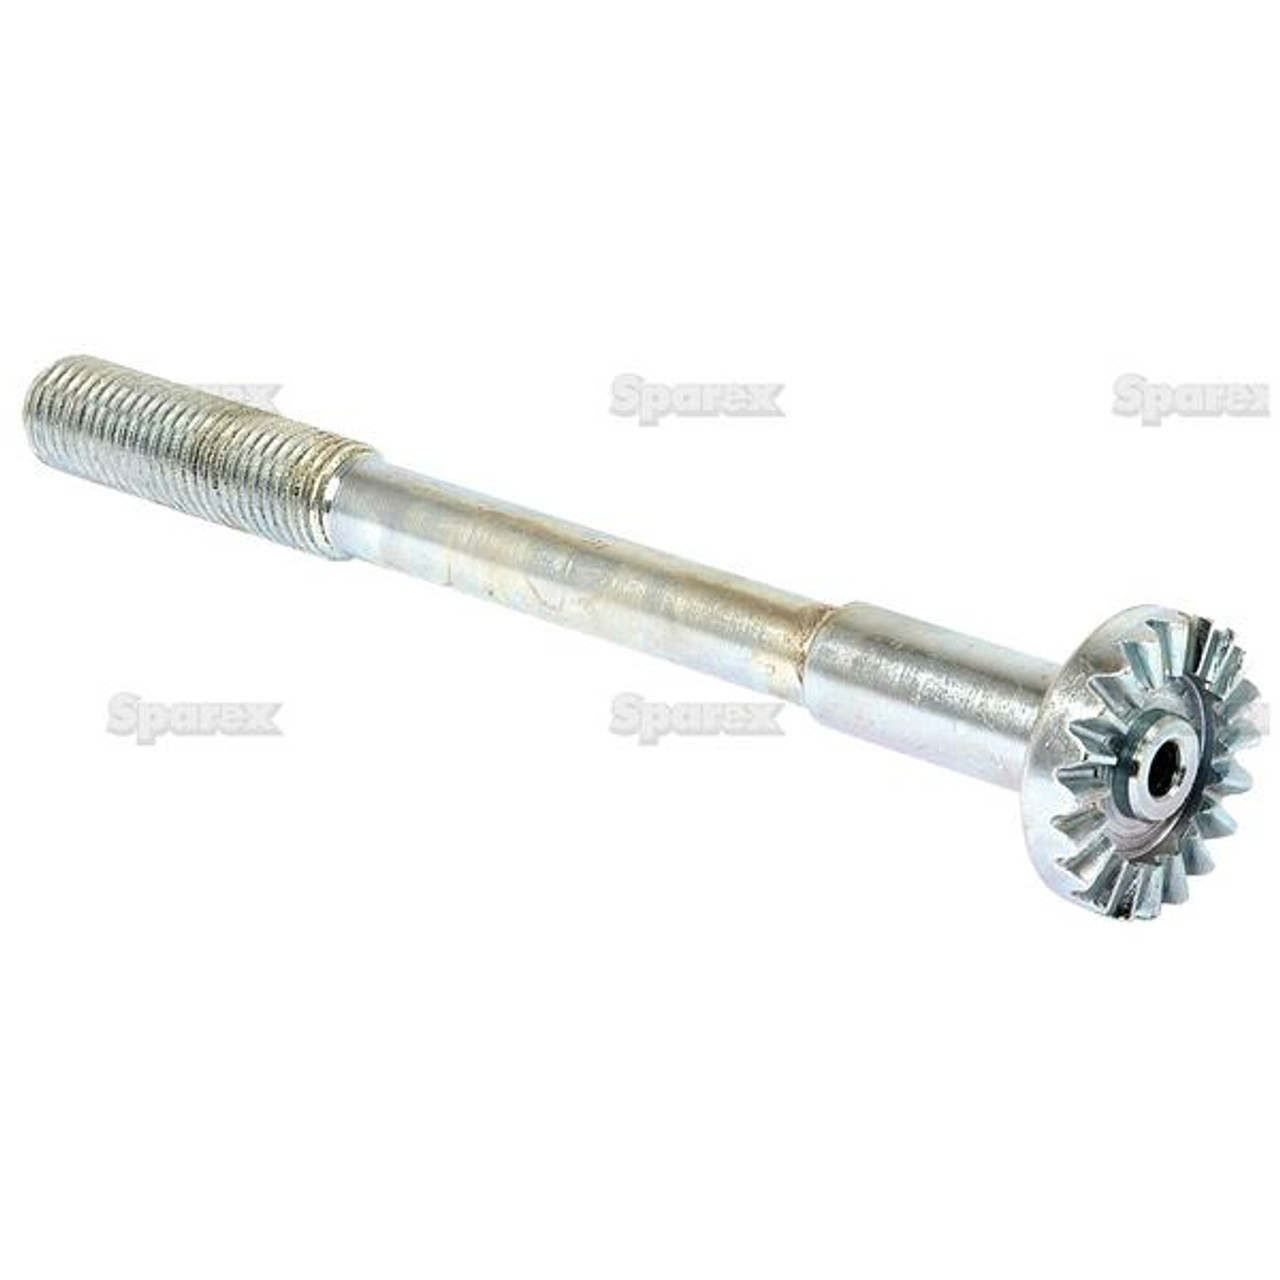 Tractor  SHAFT & GEAR Part Number S69899